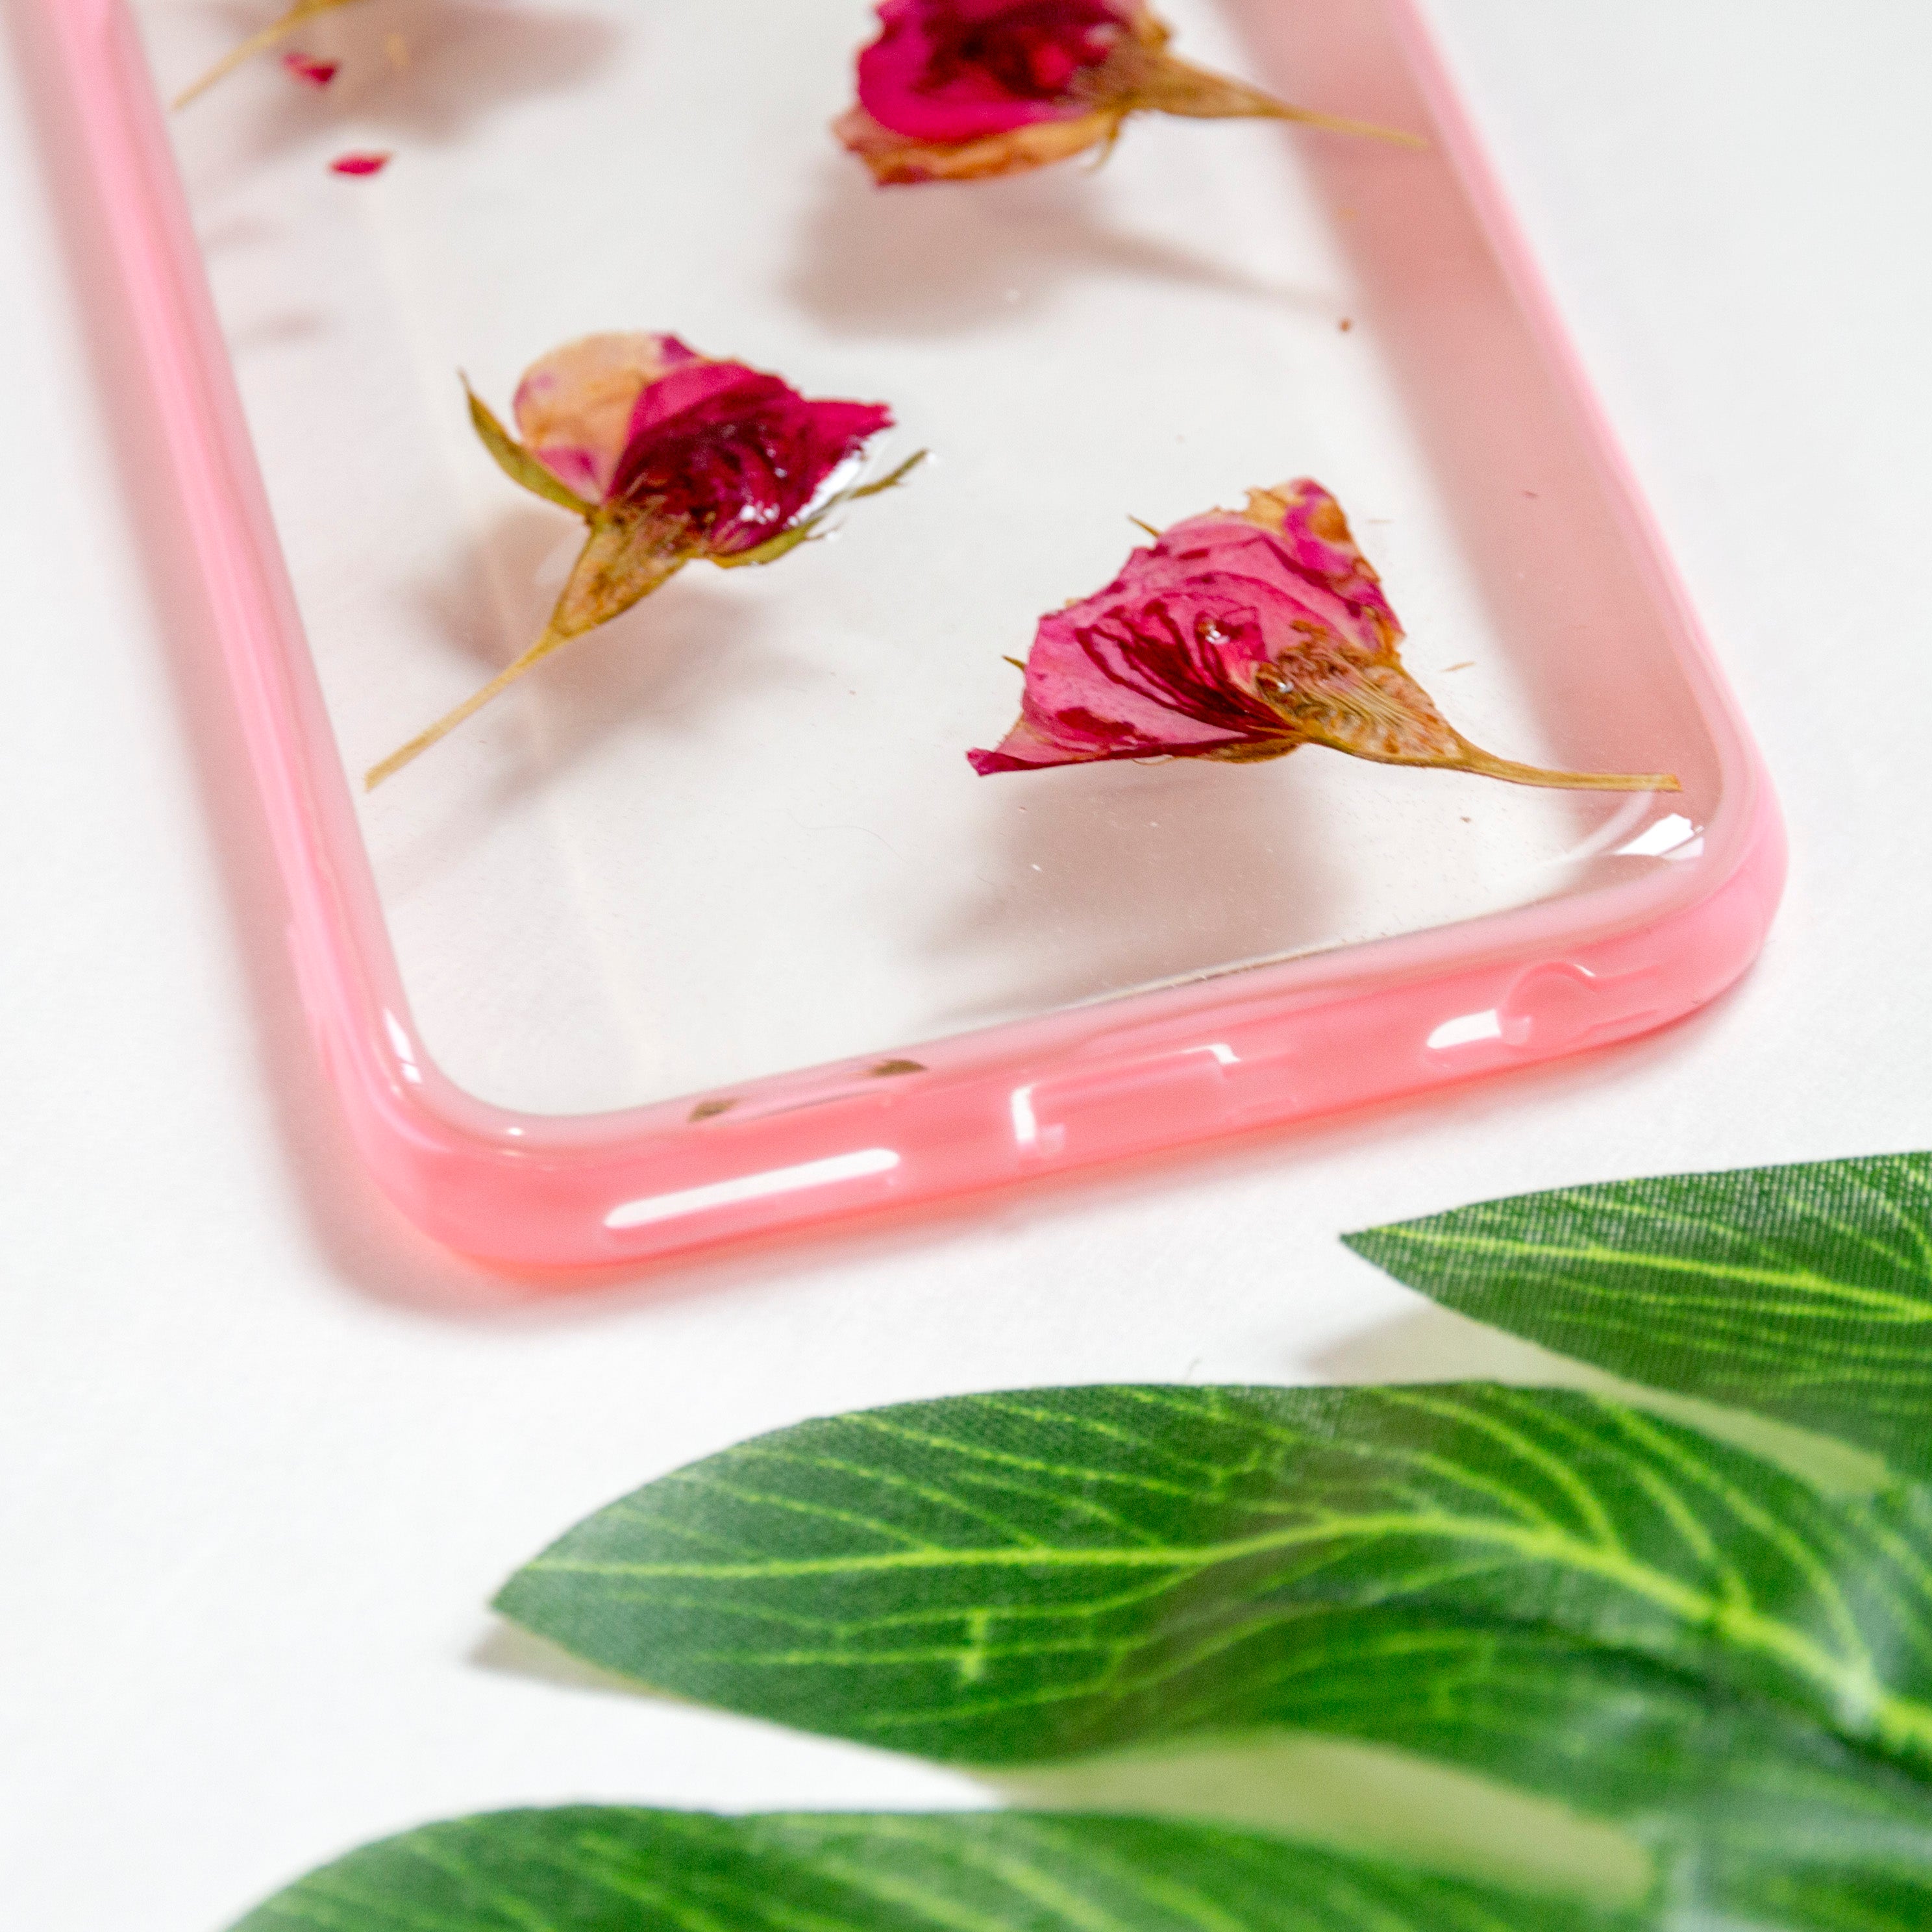 pressed red rose flower cute protective floral iphone 6 6s bumper case aesthetic cherry rose floral neverland floralfy